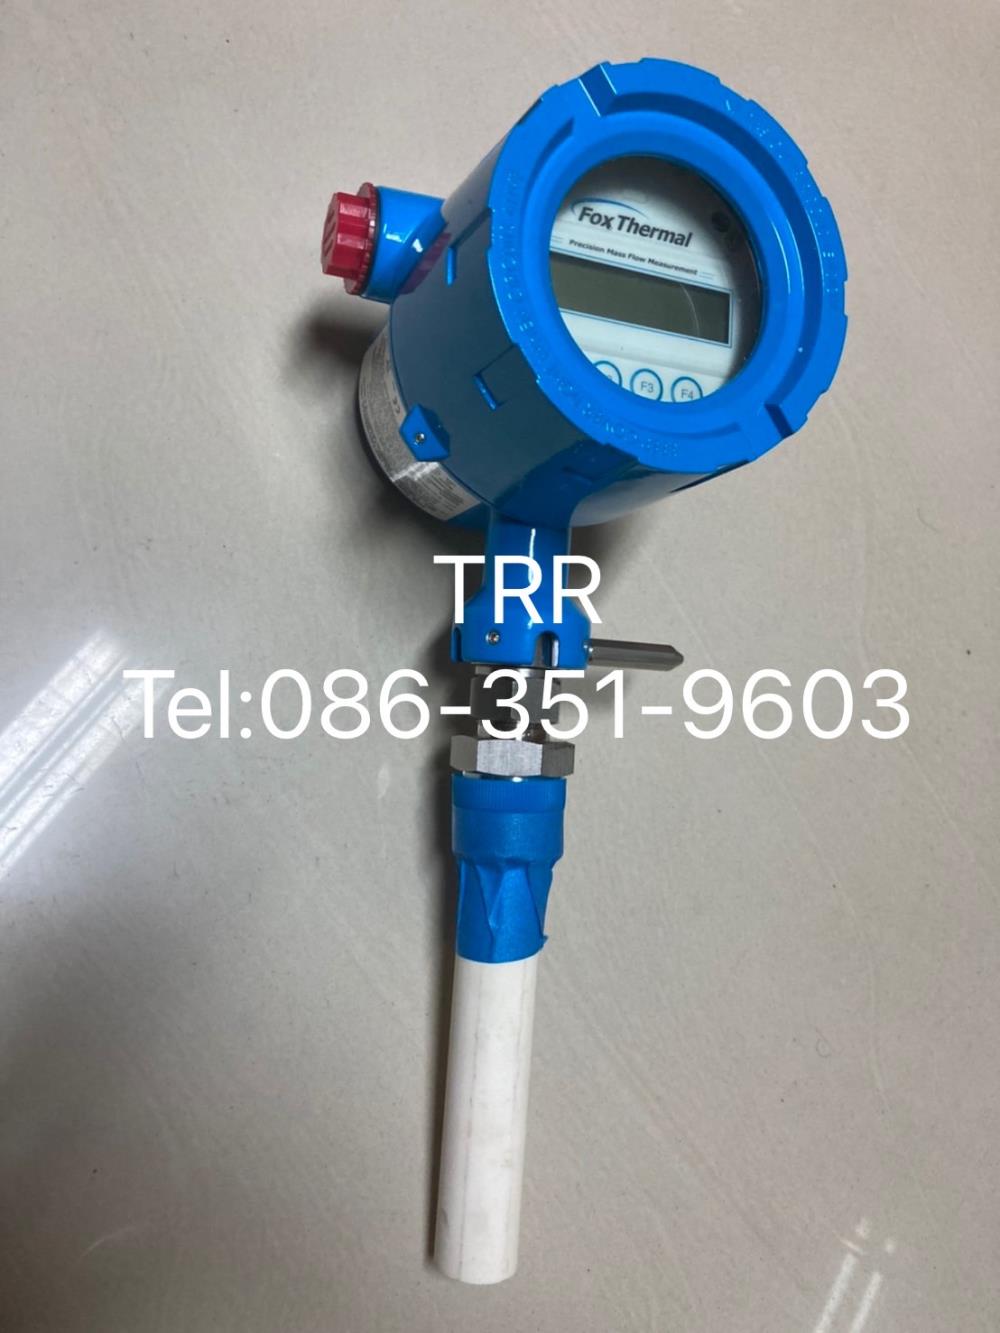 FOX FT1-06IDDP1,FOX FT1-06IDDP1,FOX FT1-06IDDP1,Instruments and Controls/Flow Meters